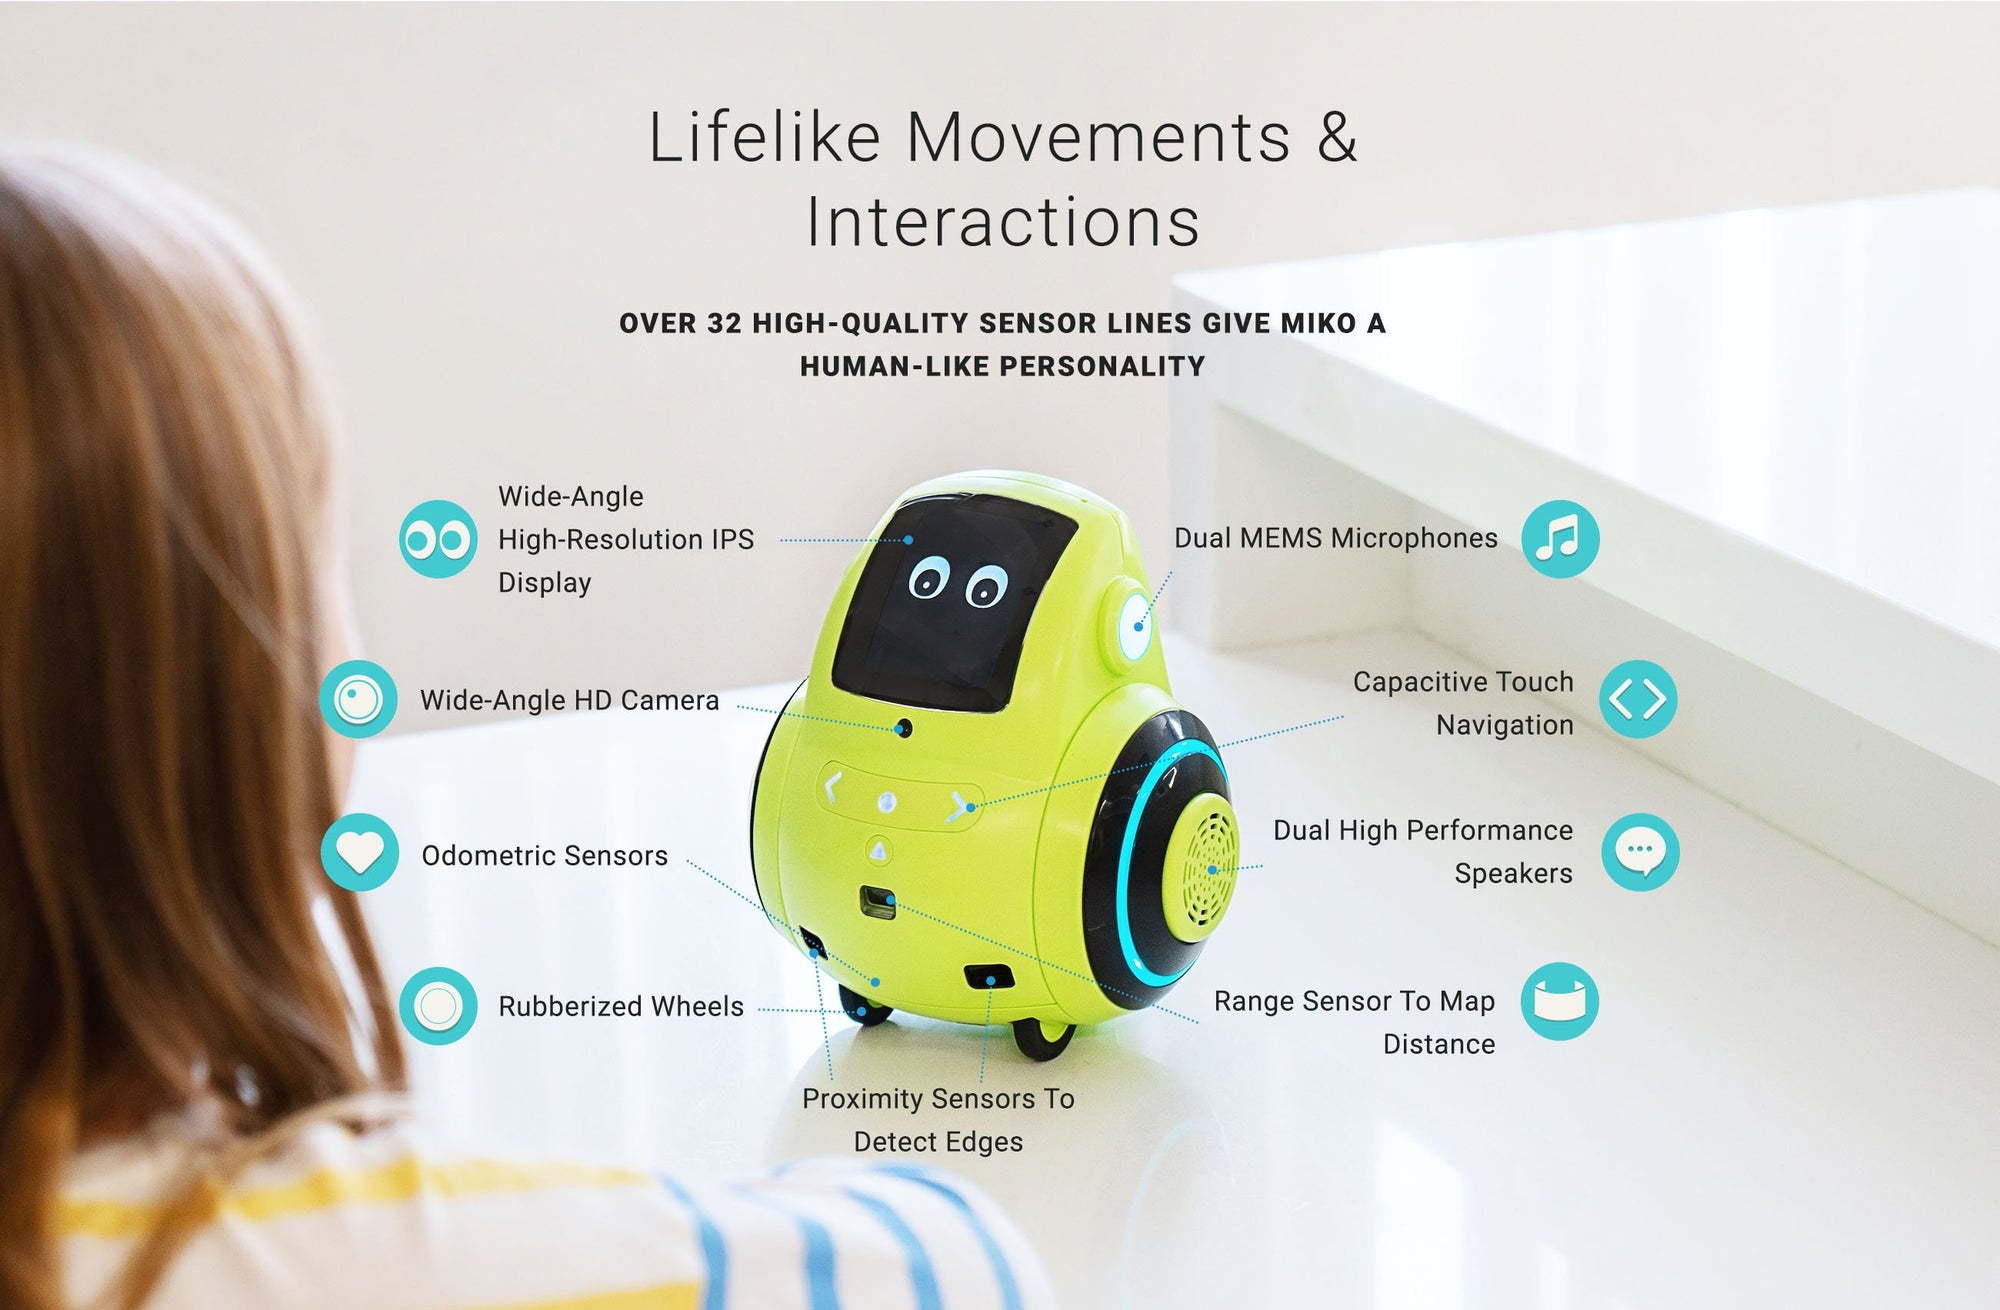 Make Learning Fun With the Miko 2 Robot